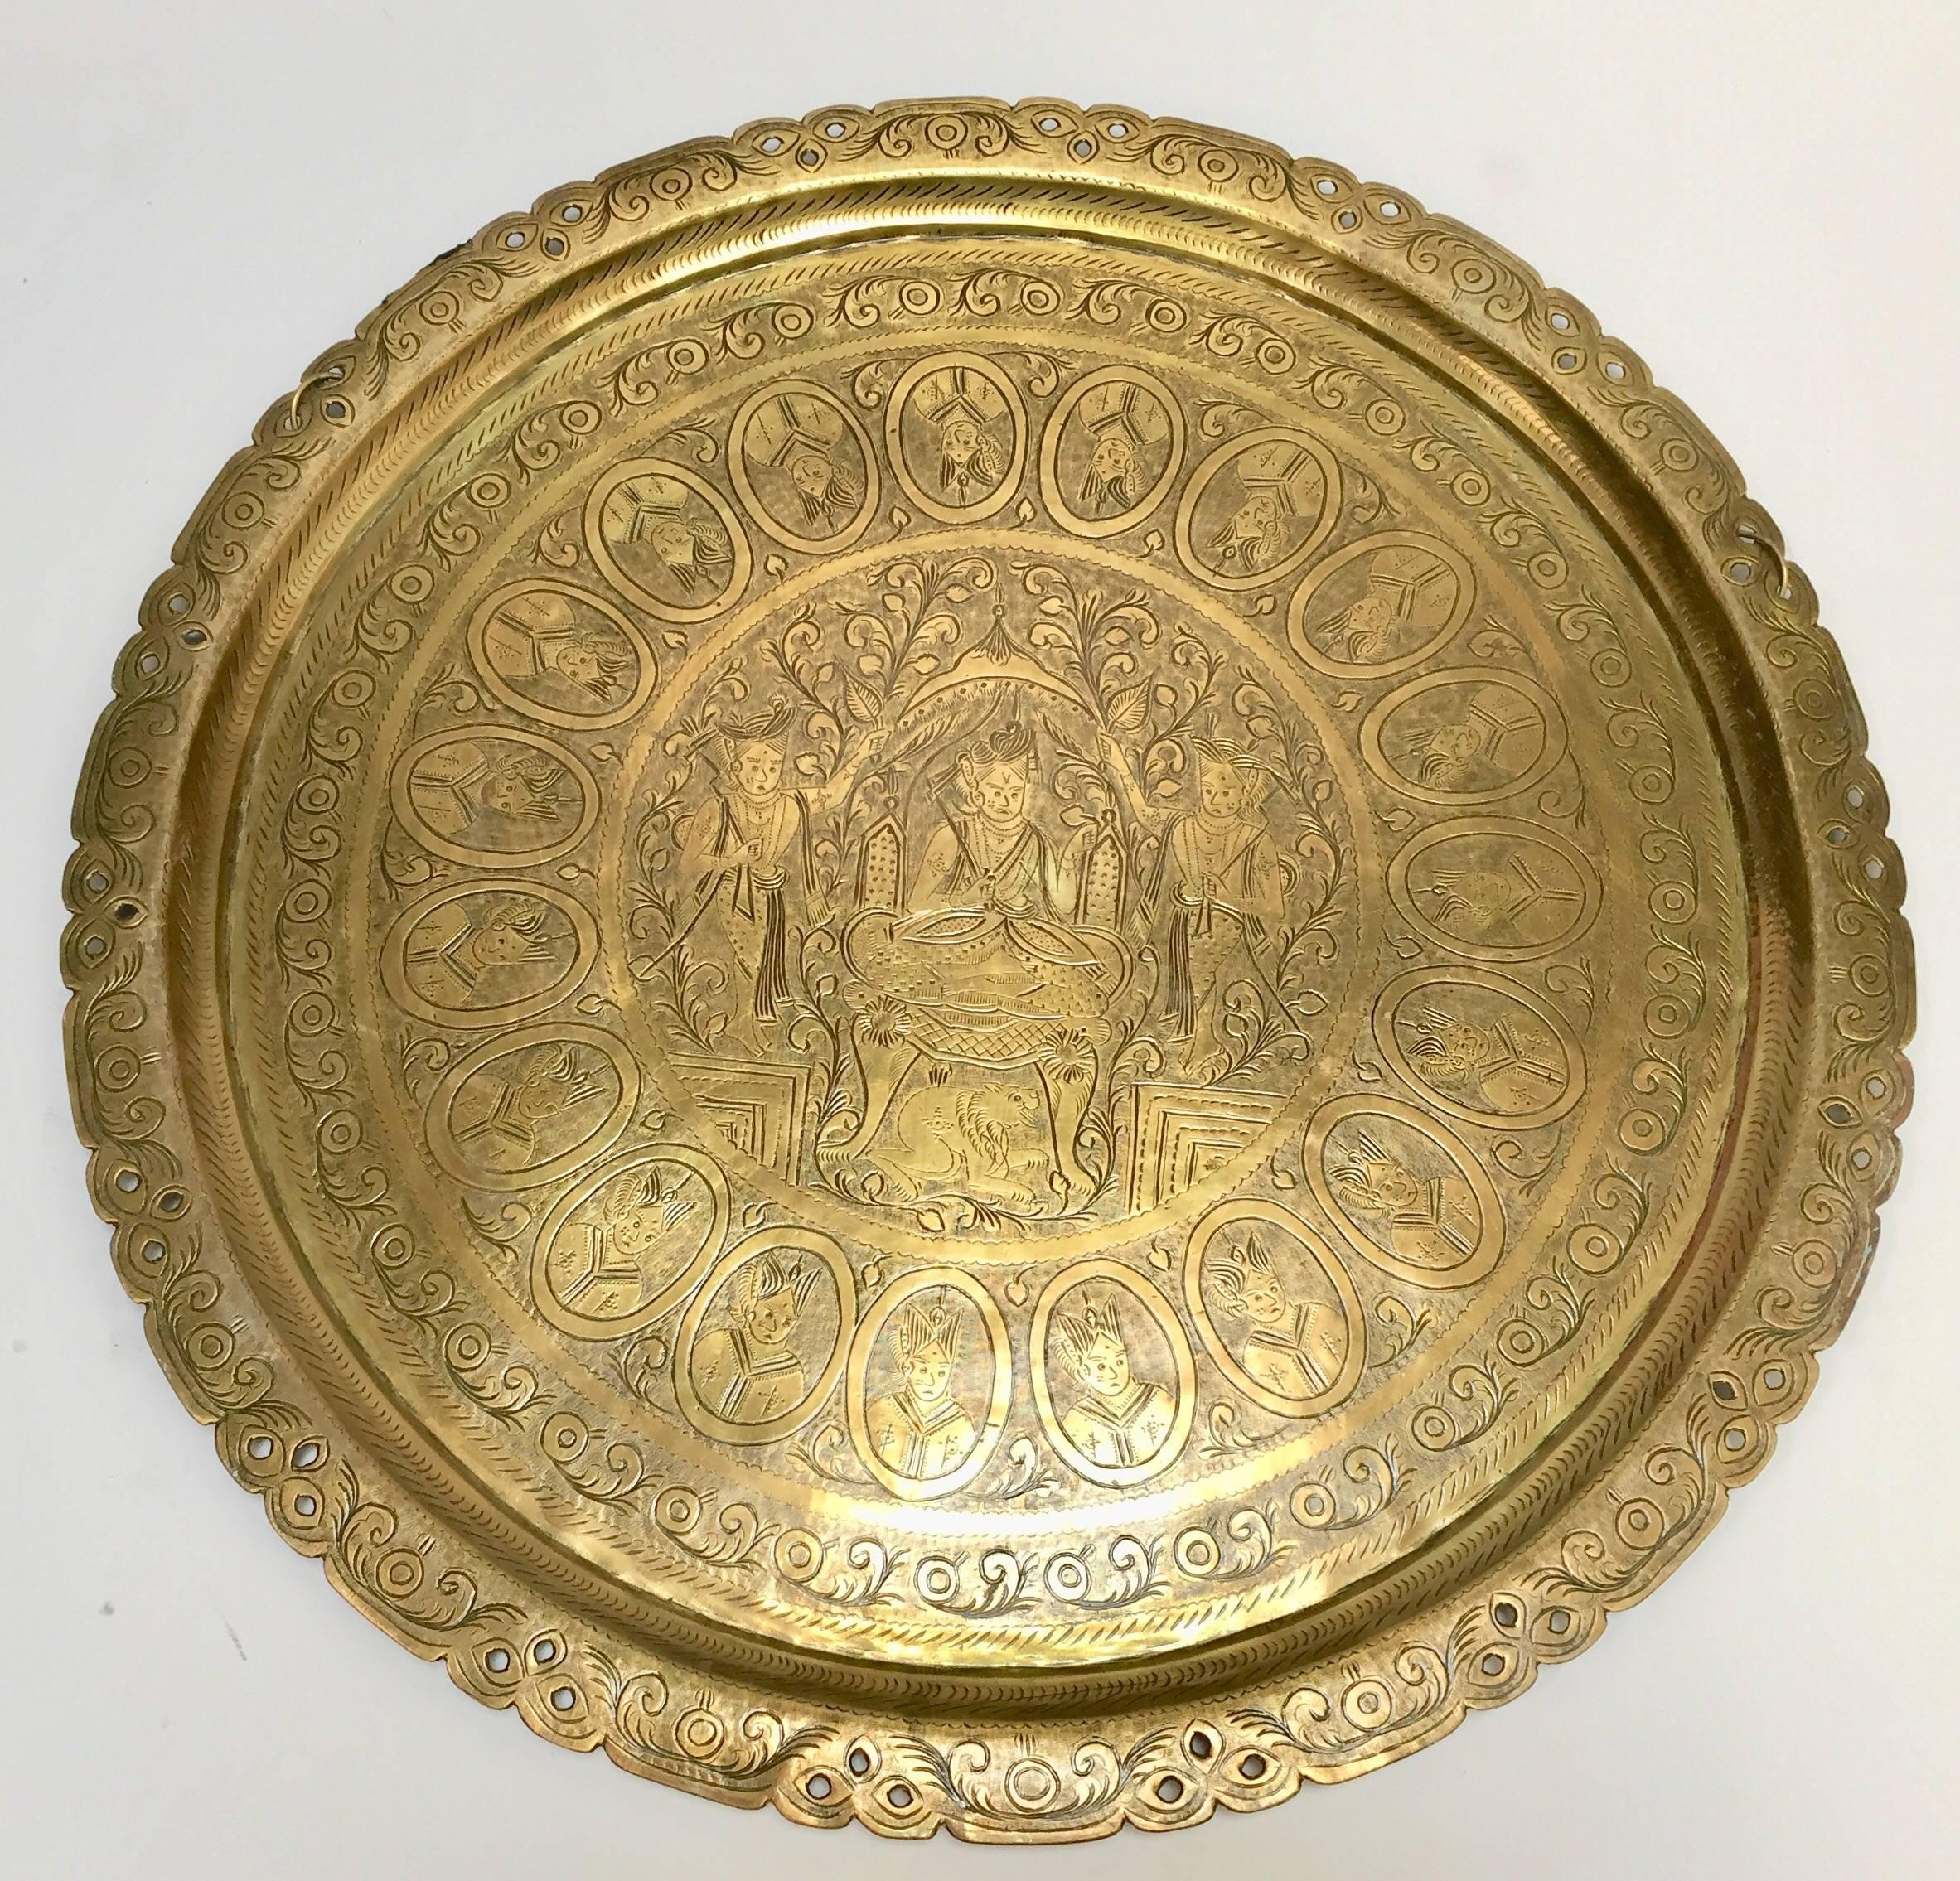 Rare find, Asian brass round tray hand chased with in Mameluke style.
Engraved scenes with a King on his throne and disciples depicting a story of a royal court life, and the same figure of a king all around.
Gold polished varnished brass,